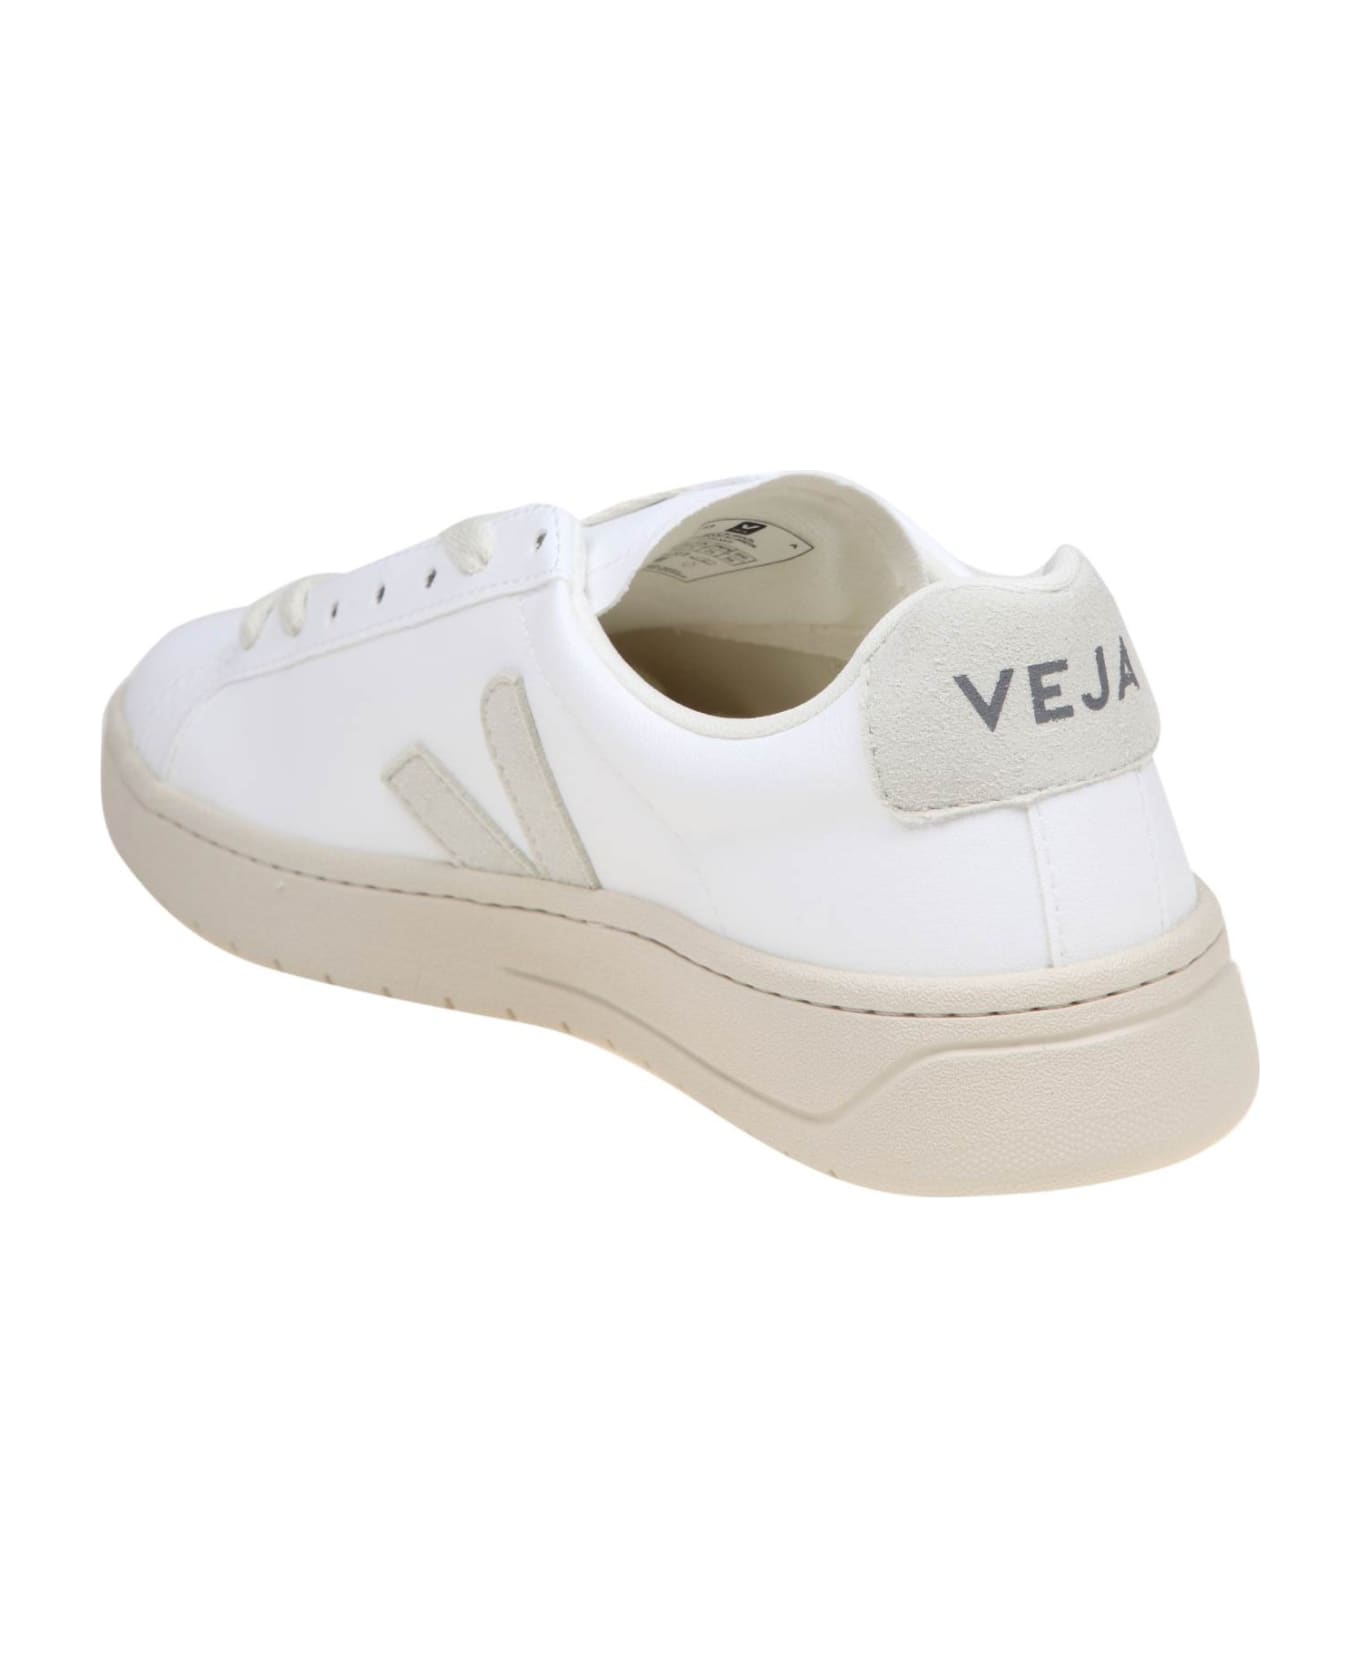 Veja Urca Sneakers In White Coated Cotton スニーカー